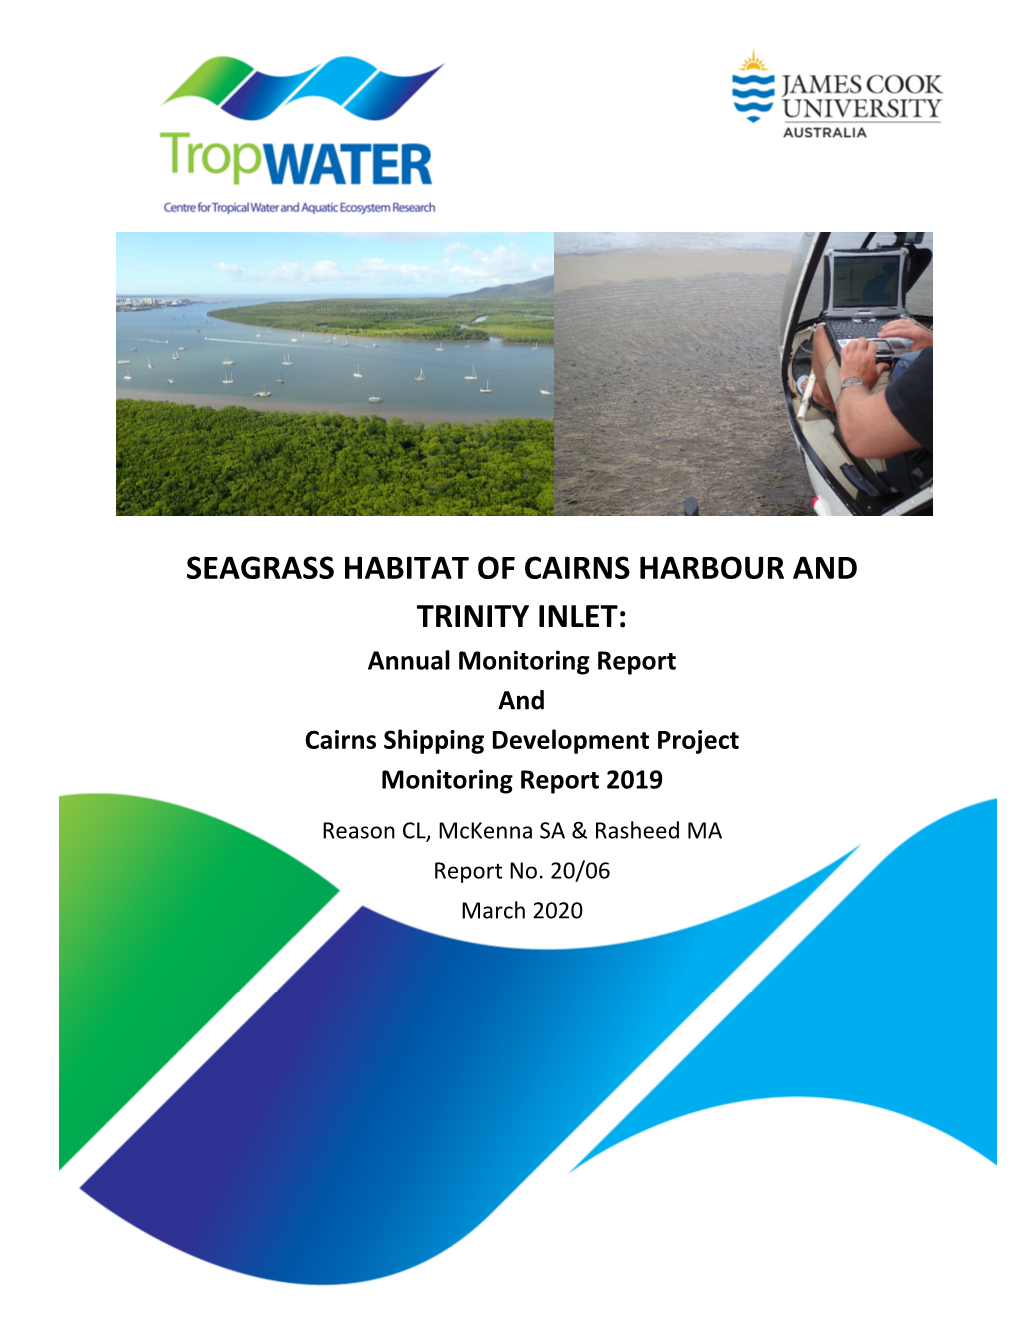 SEAGRASS HABITAT of CAIRNS HARBOUR and TRINITY INLET: Annual Monitoring Report and Cairns Shipping Development Project Monitoring Report 2019